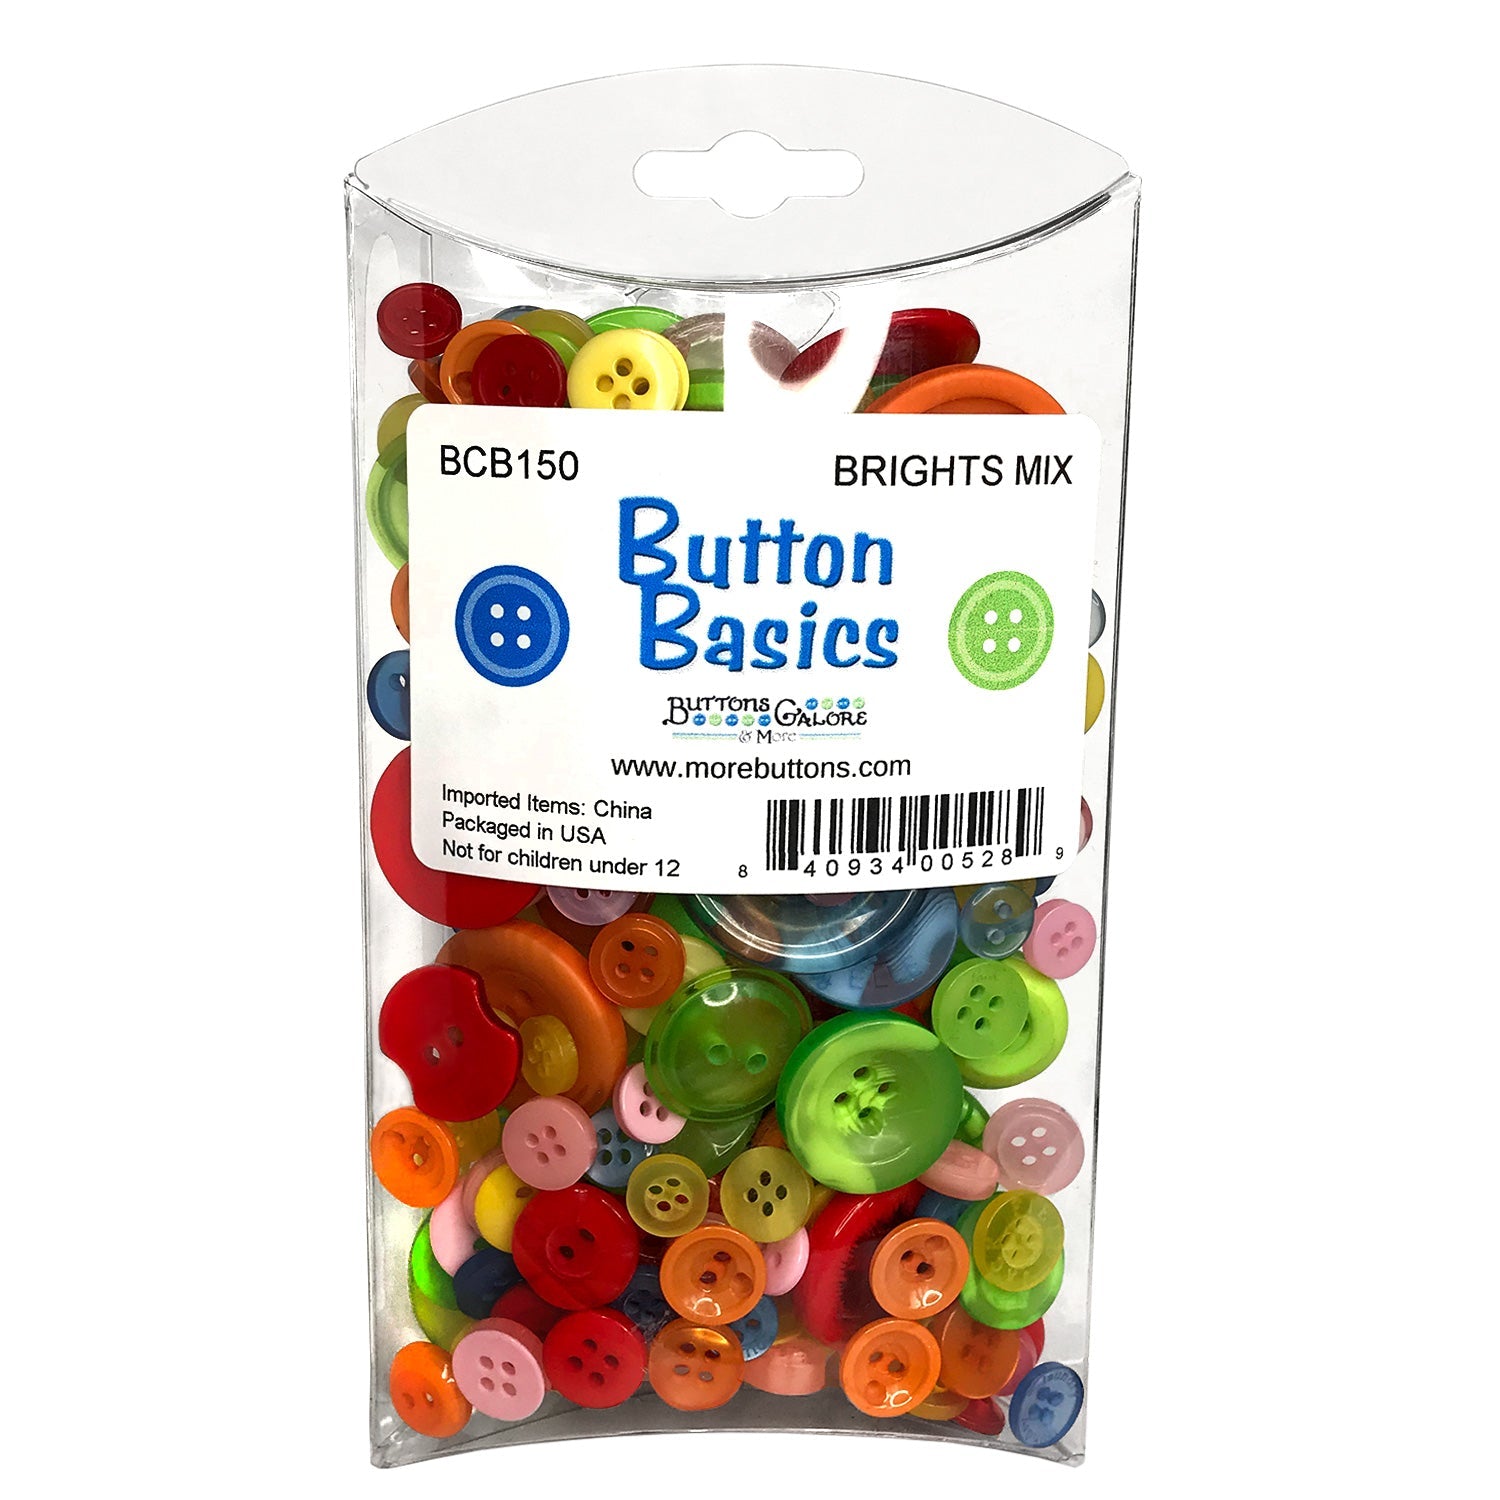 20 pcs Big buttons 4 holes size 33 mm mix assorted colors for sewing crafts